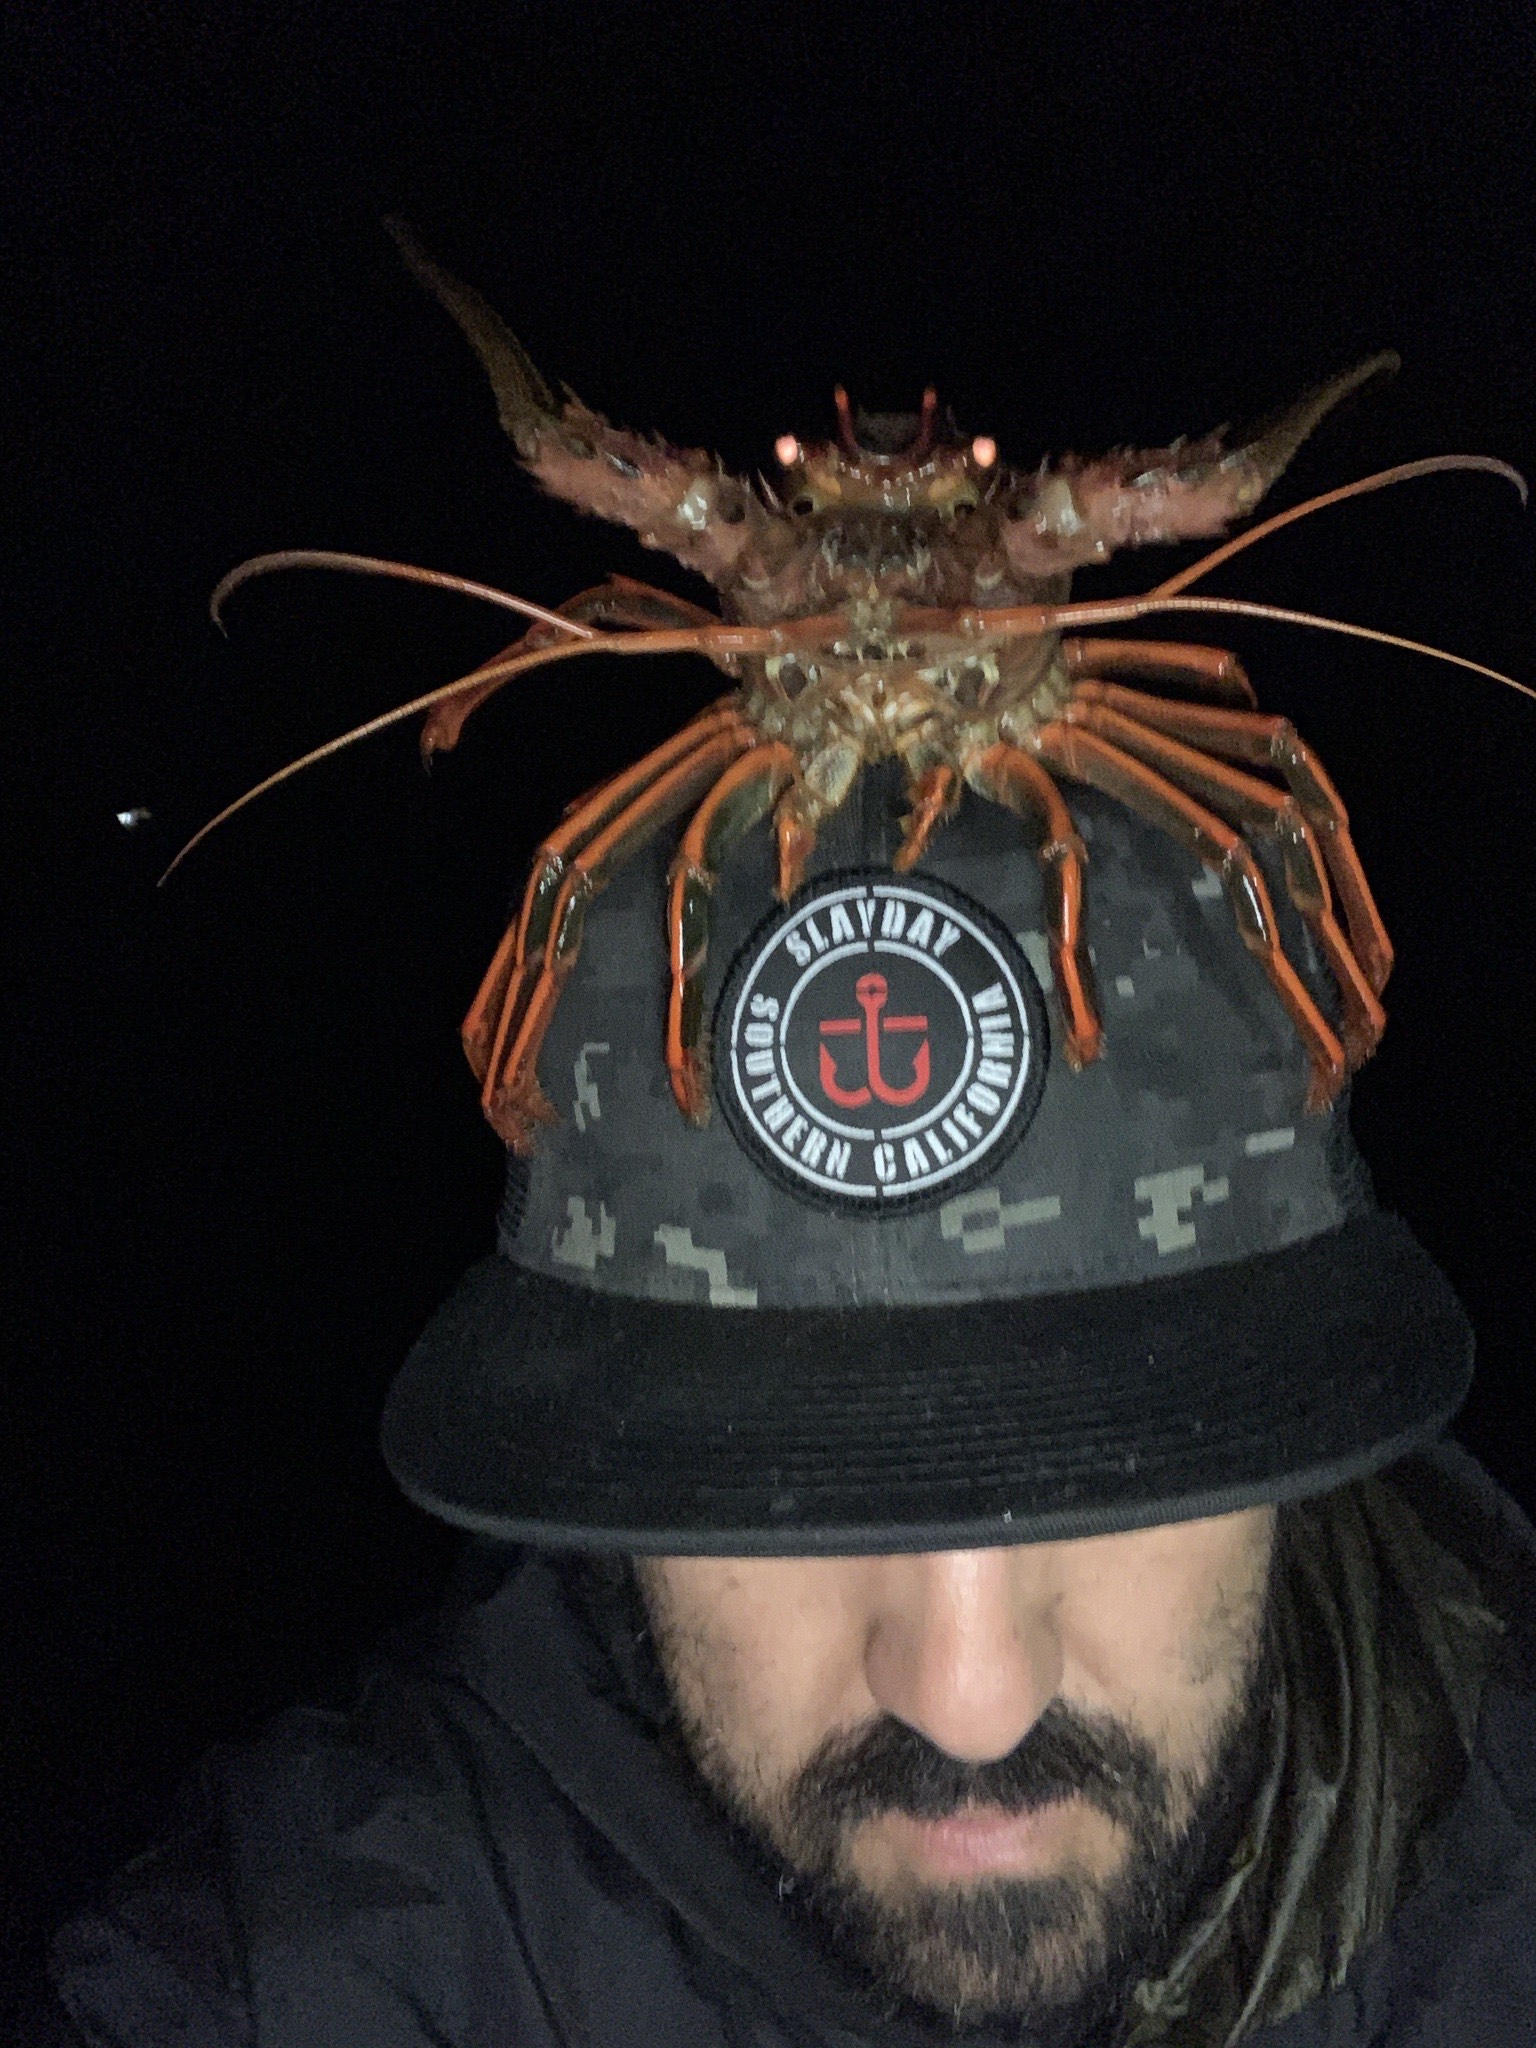 Lobster season – 5 steps to start lobster fishing for the first time  (rules, equipment, tips etc for Oct 1st opener)